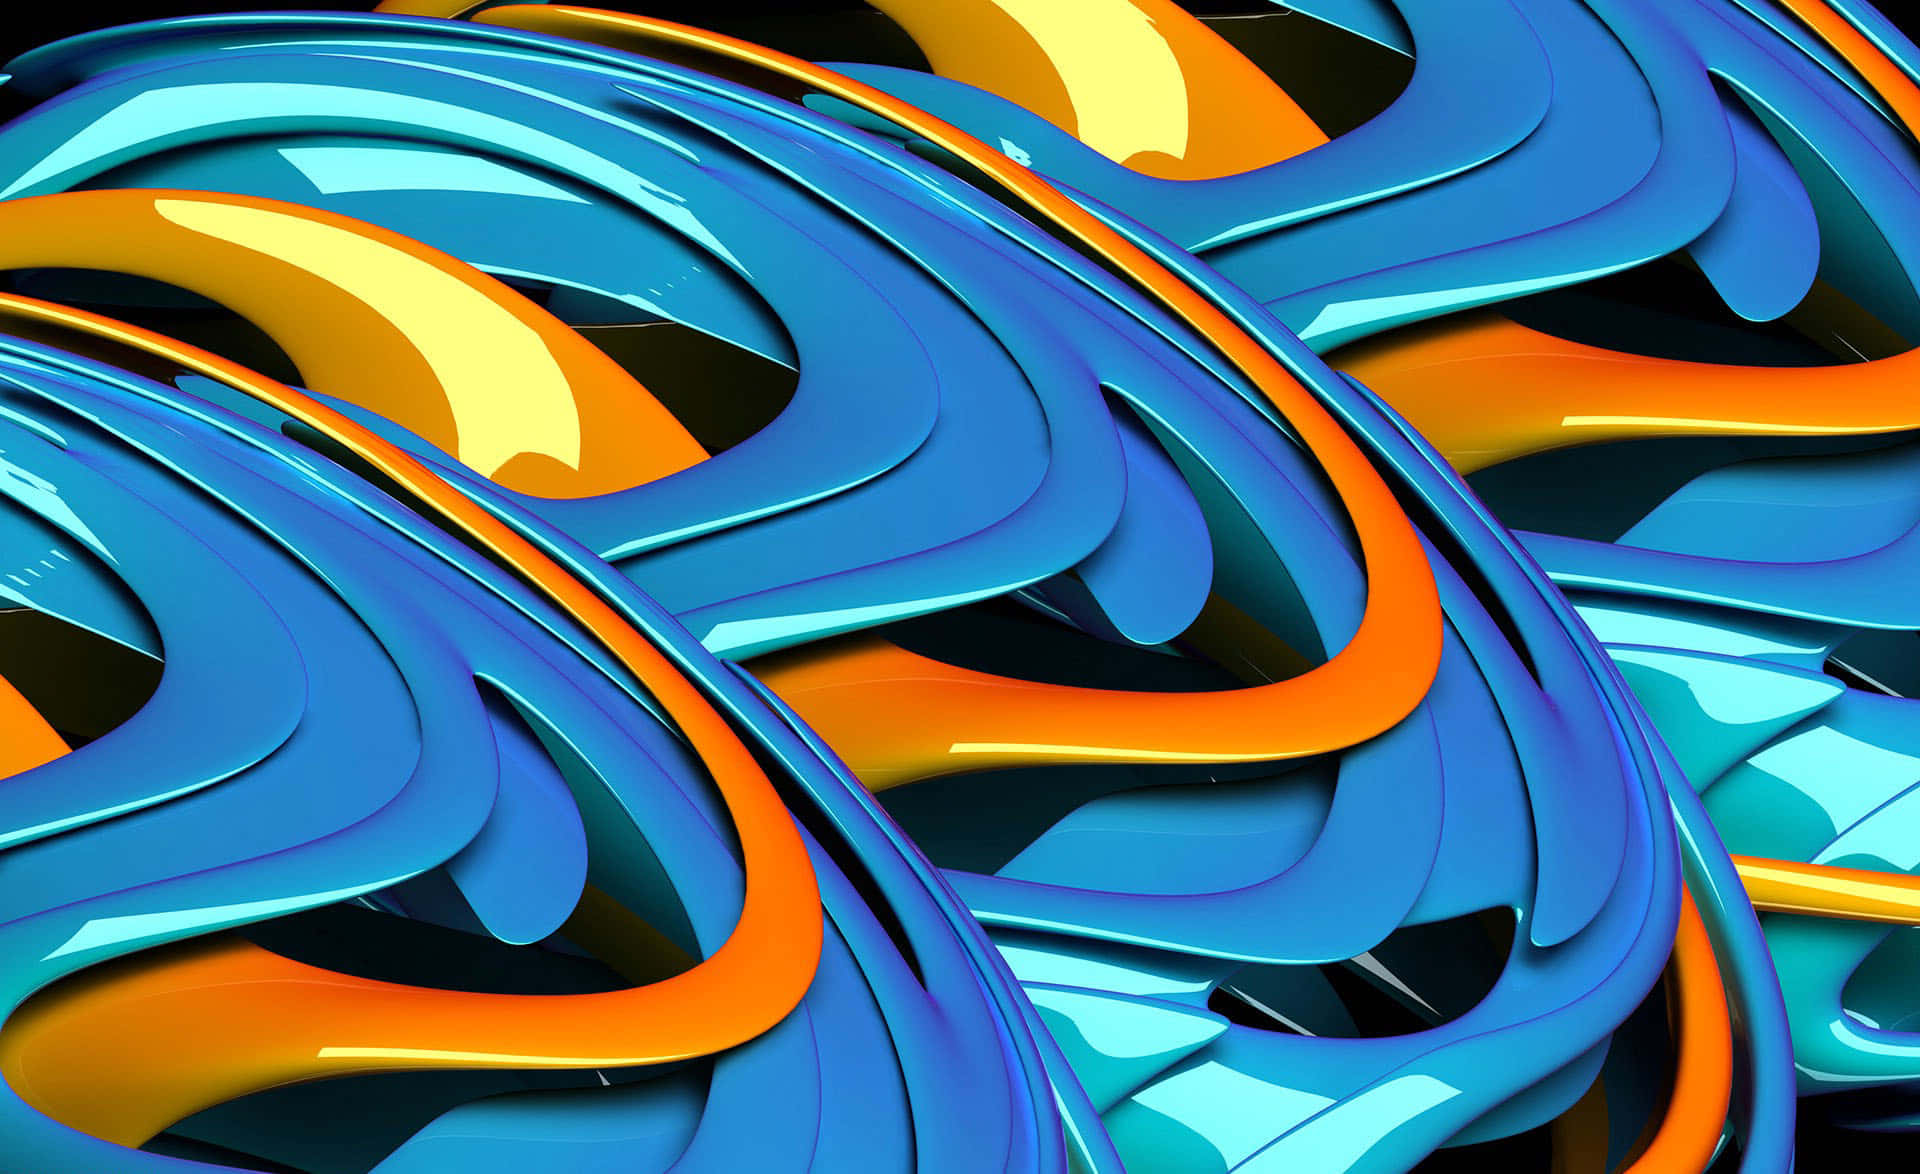 A vibrant visual of blue and orange